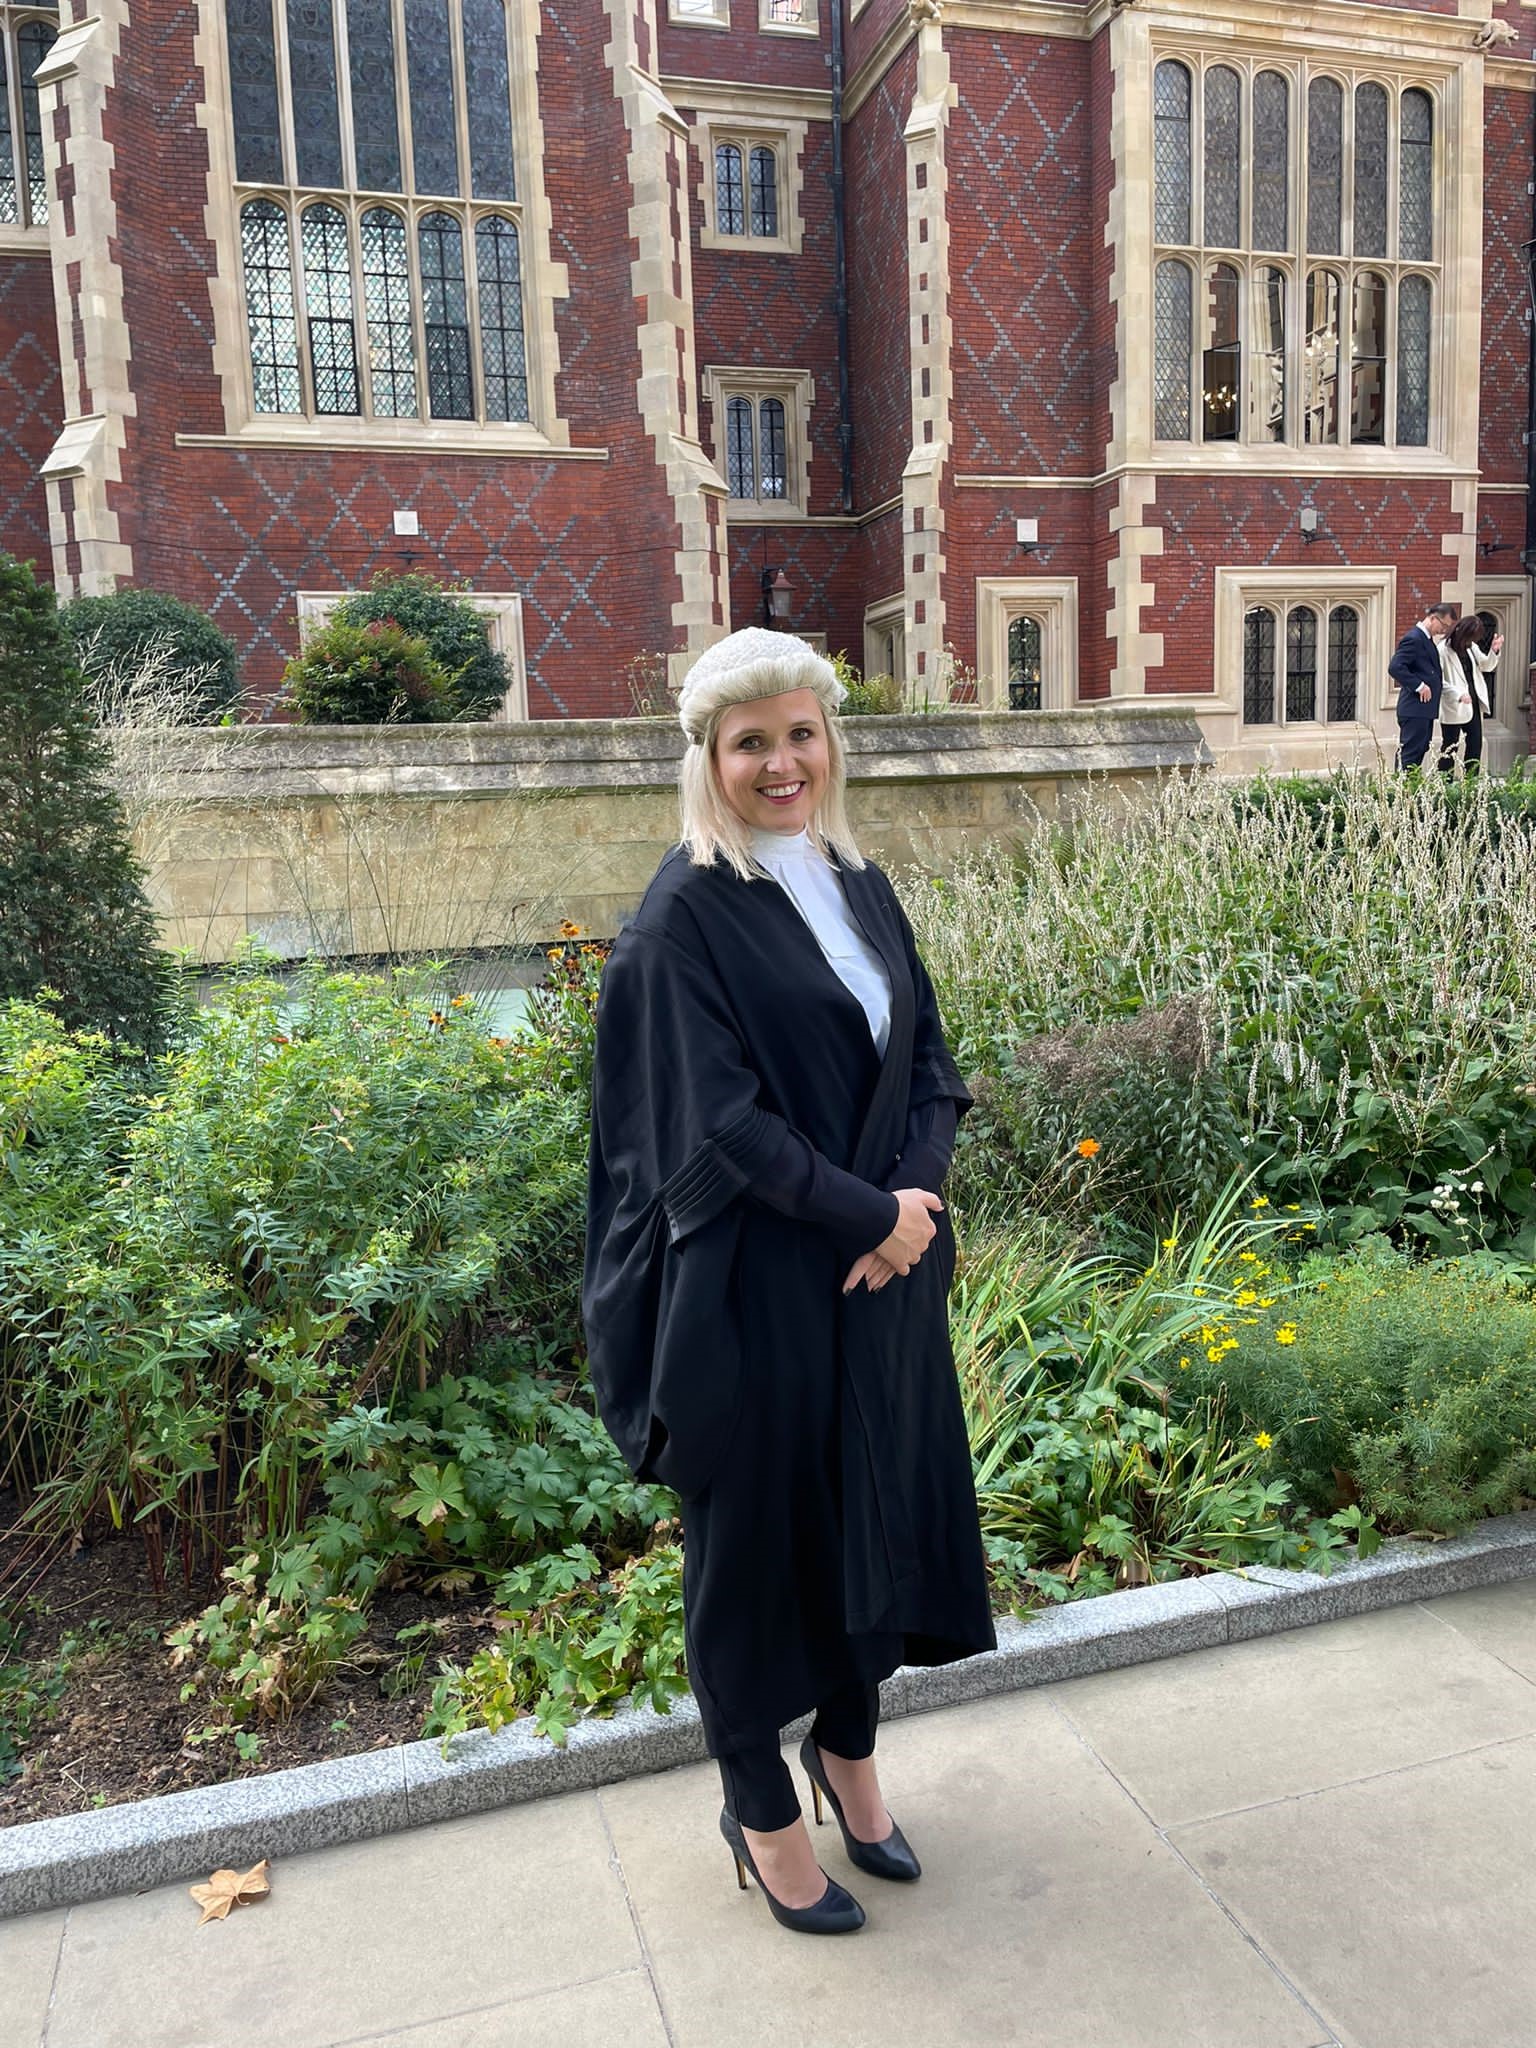 Wilberforce Barristers welcomes new pupil barrister, Natalie Dean.